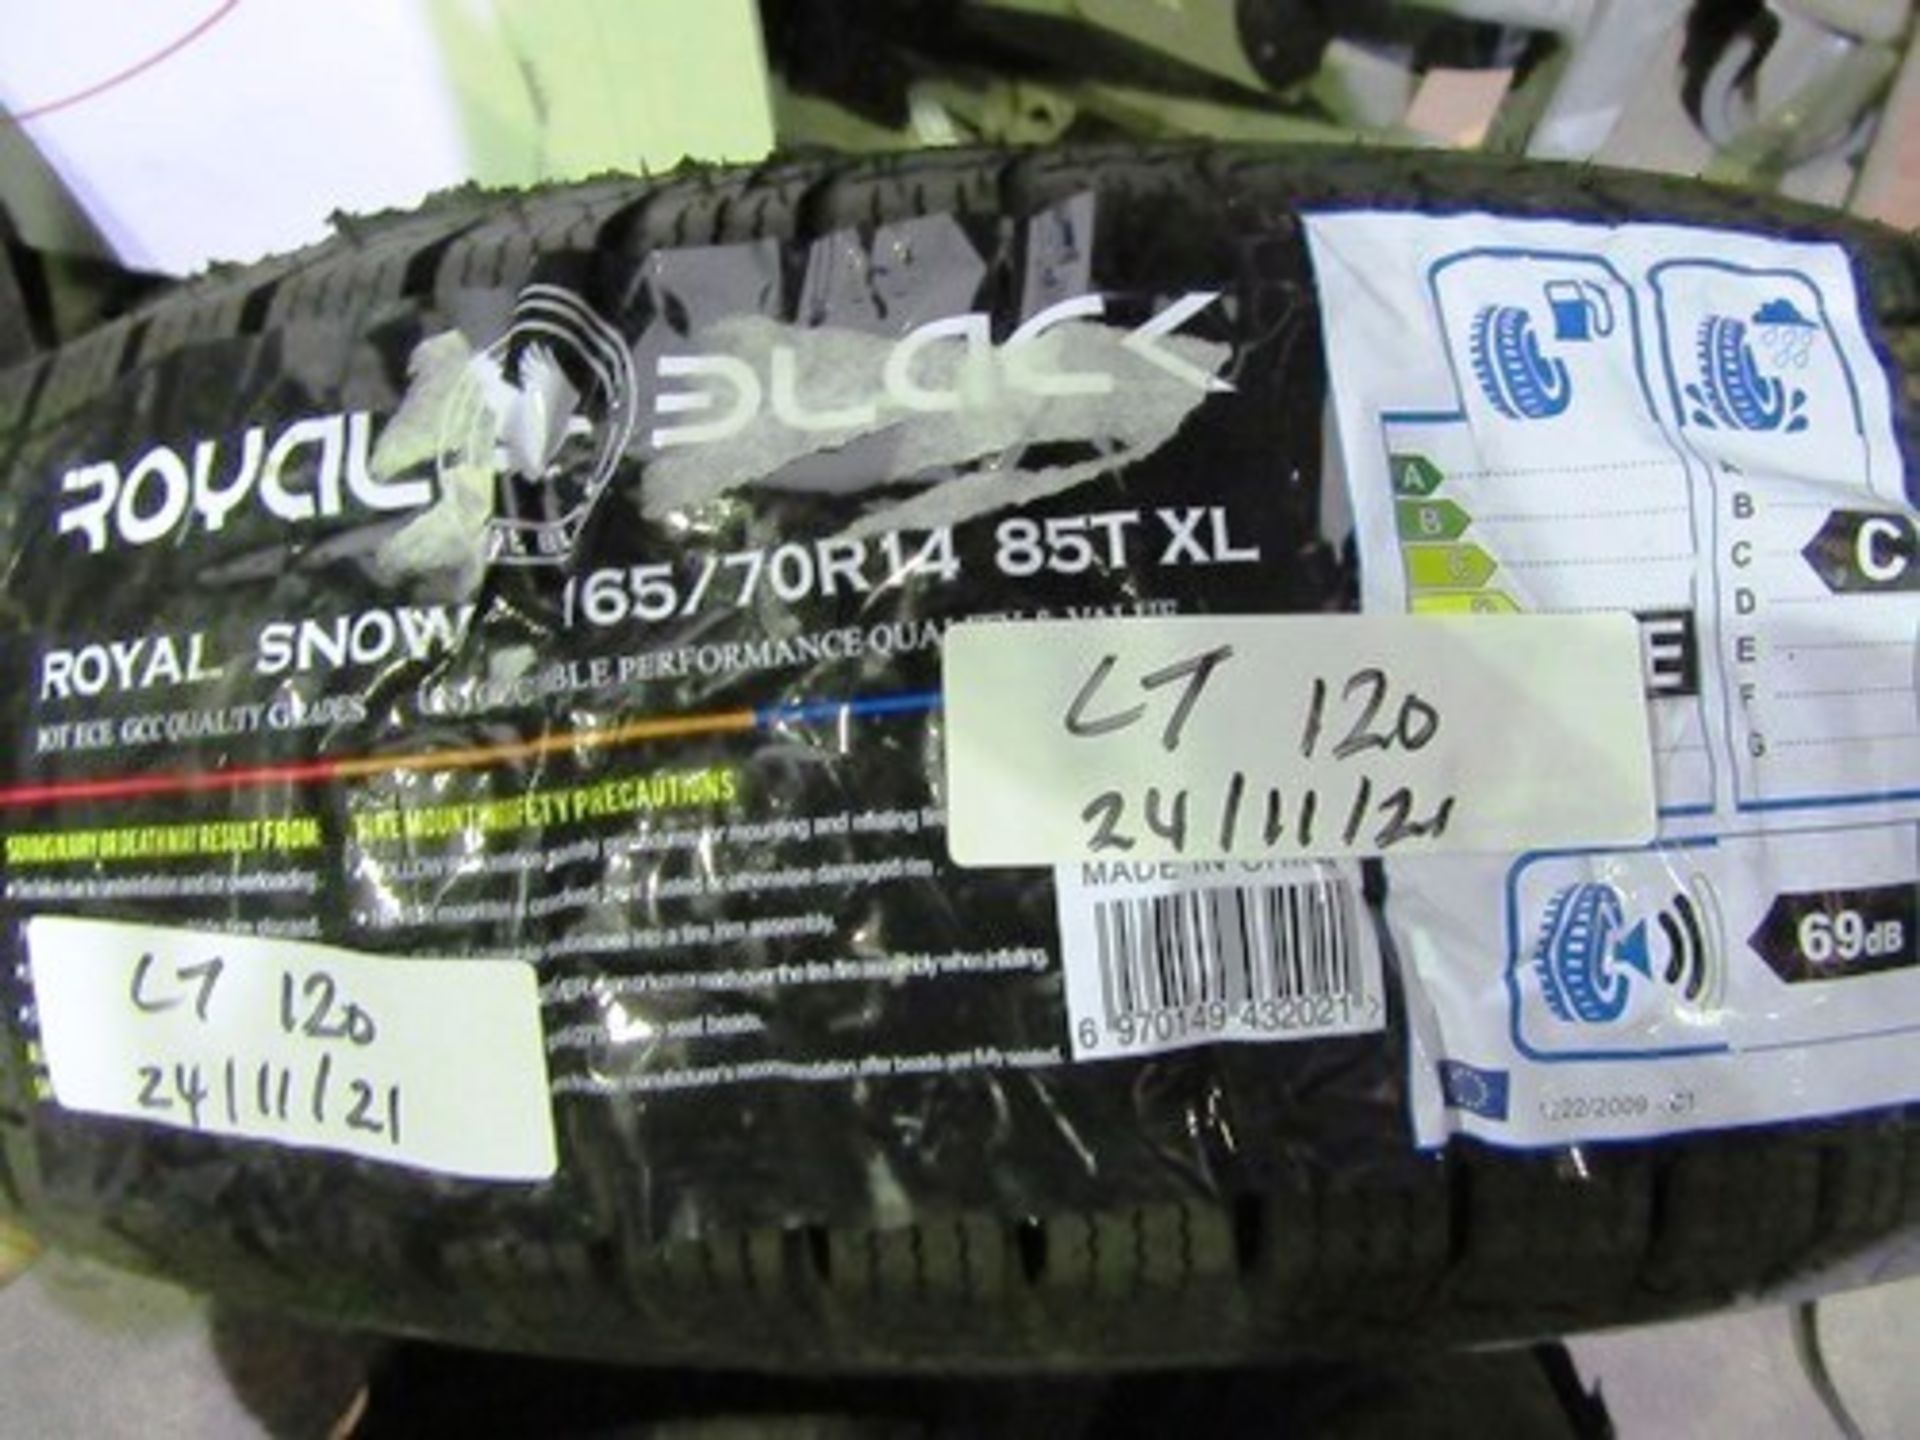 1 x Prestivo PV-HP2 tyre, size 185/55R14 80H, 1 x Royal Snow tyre, size 165/70R14 85T XL and 1 x - Image 2 of 2